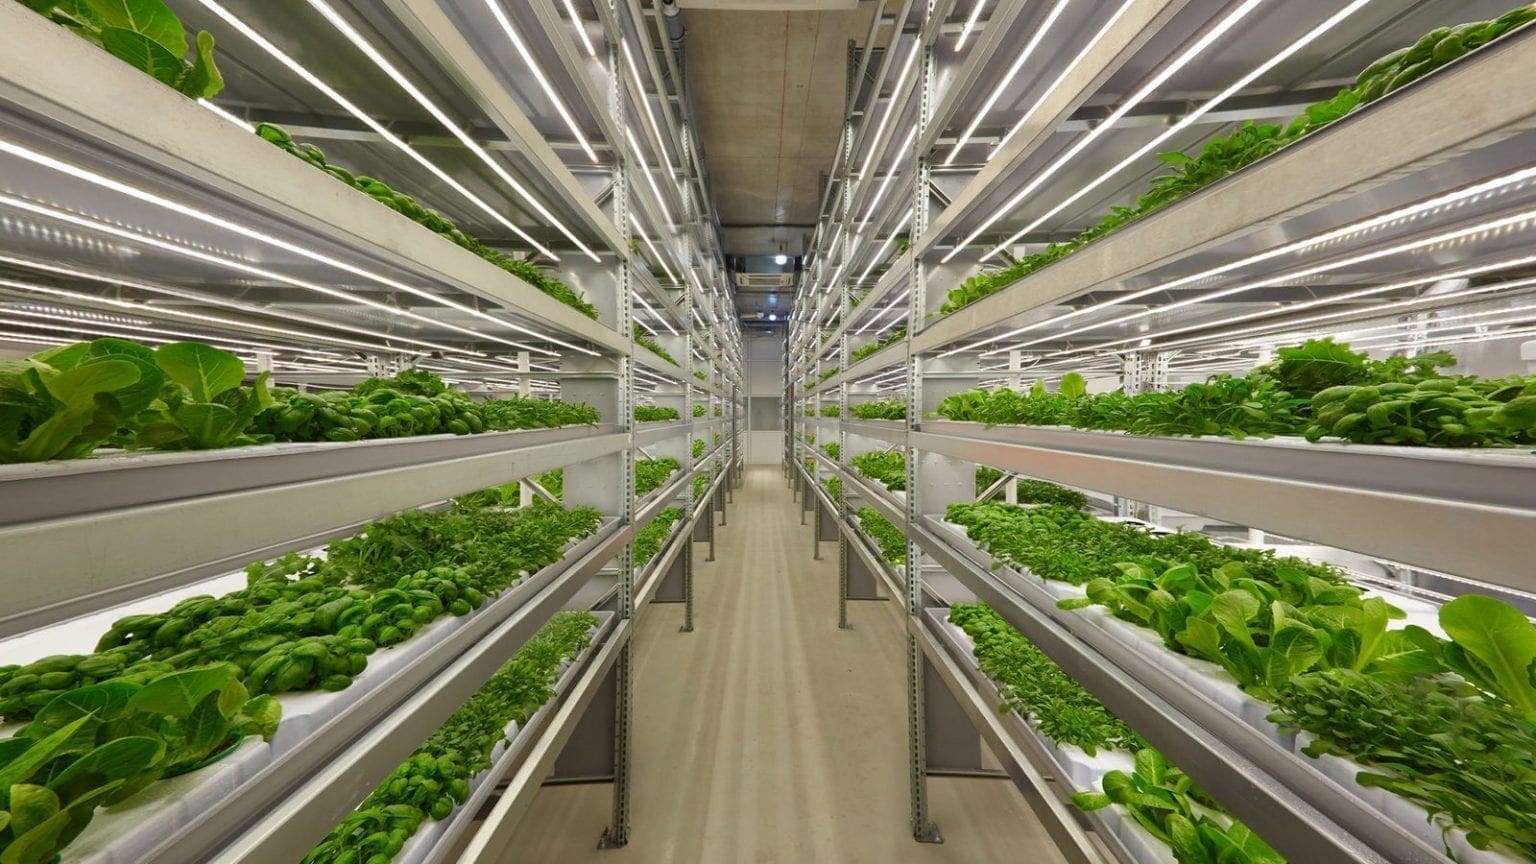 Food safety certification for indoor-grown leafy greens launched